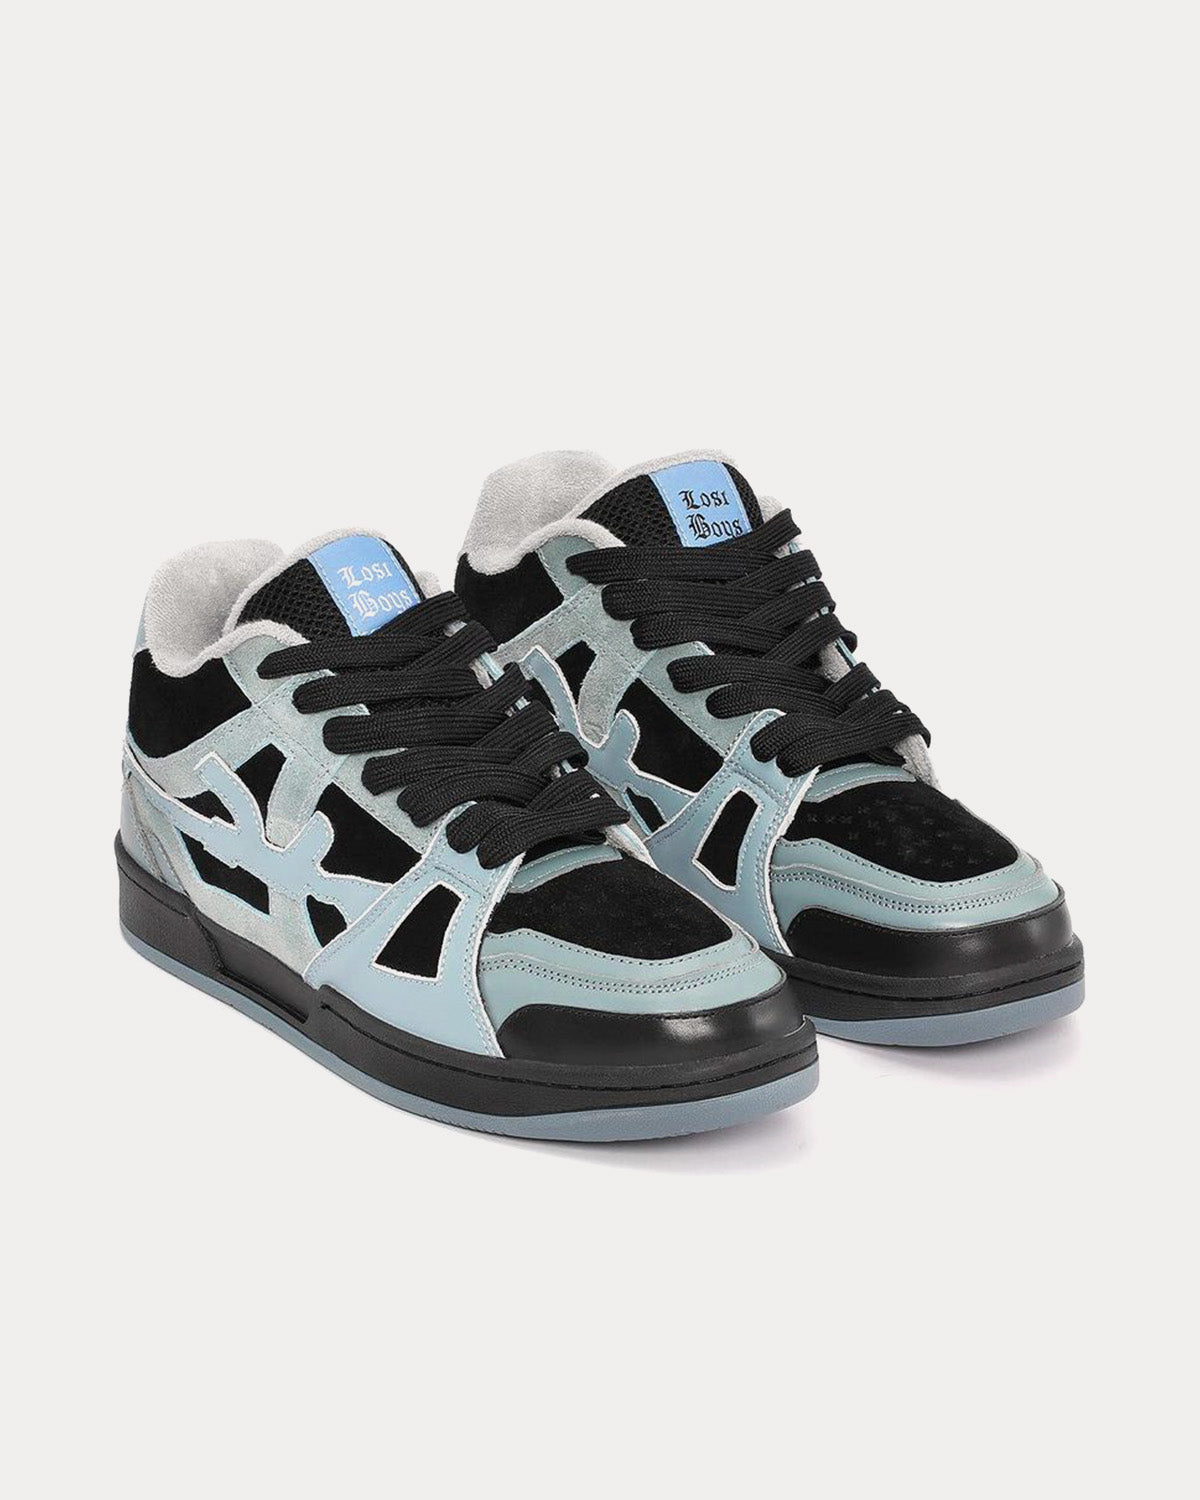 Lost Boys - Summits Frostbite Low Top Sneakers